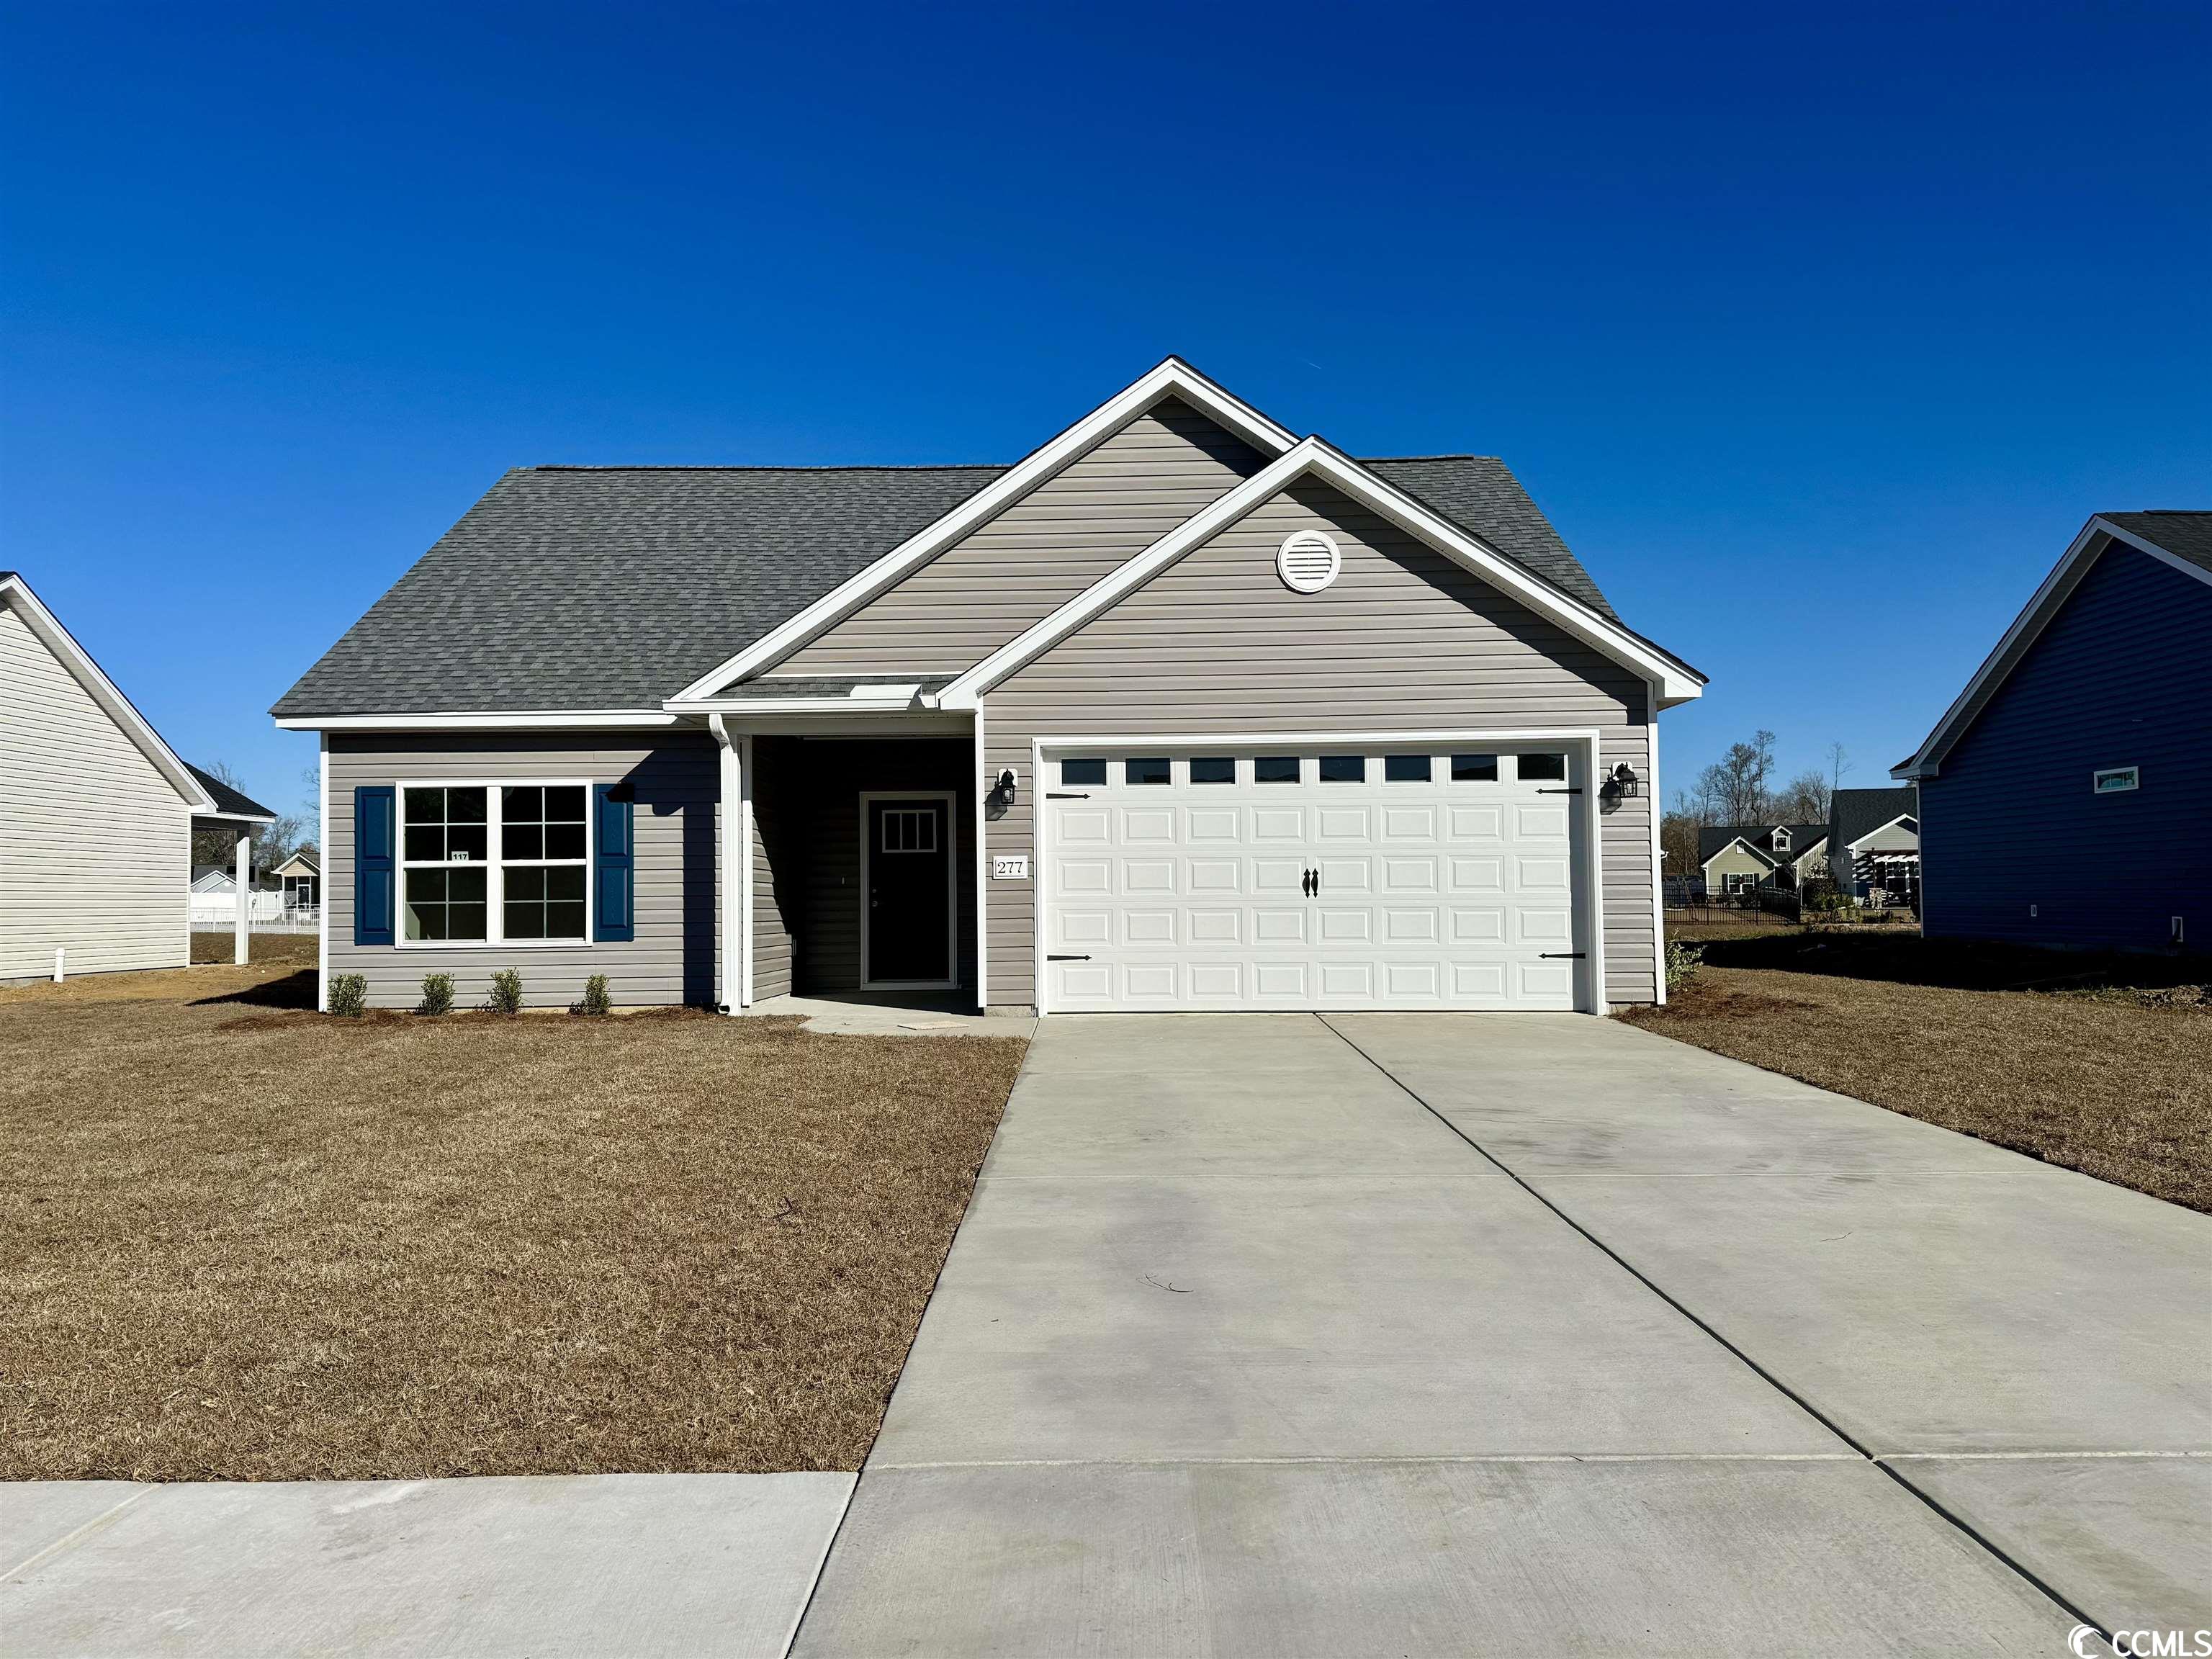 277 Maiden's Choice Dr. Conway, SC 29527